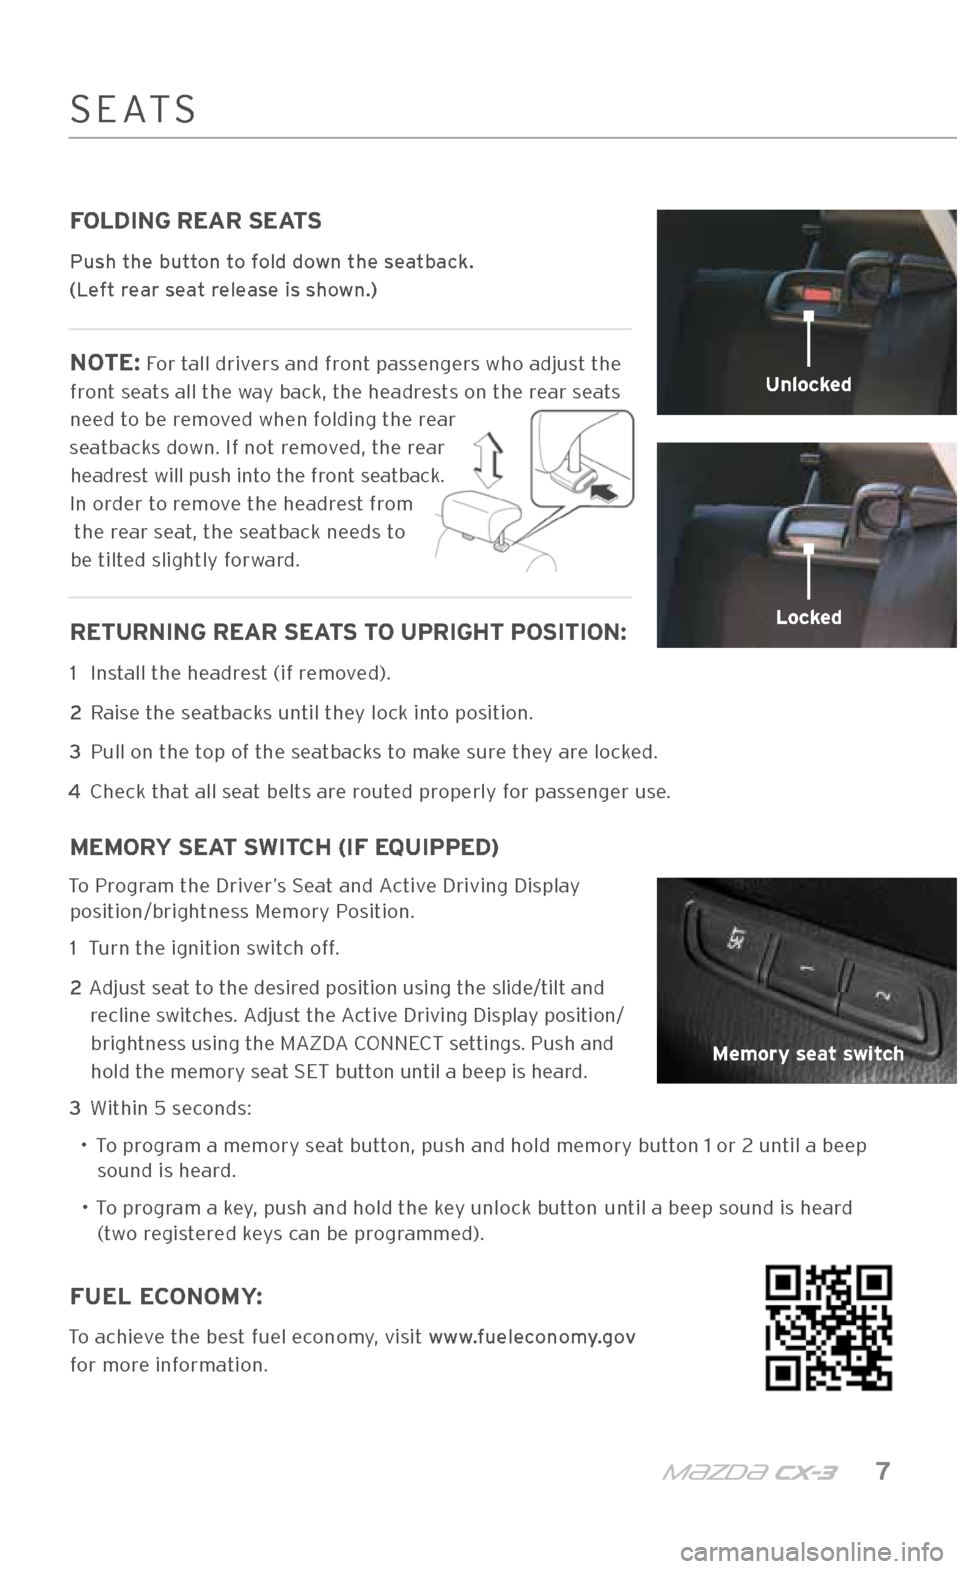 MAZDA MODEL CX-3 2018  Smart Start Guide (in English) m{zd{ c x-3    7
FOLDING REAR SEATS
Push the button to fold down the seatback.  
(Left rear seat release is shown.)
NOTE: For tall drivers and front passengers who adjust the 
front seats all the way 